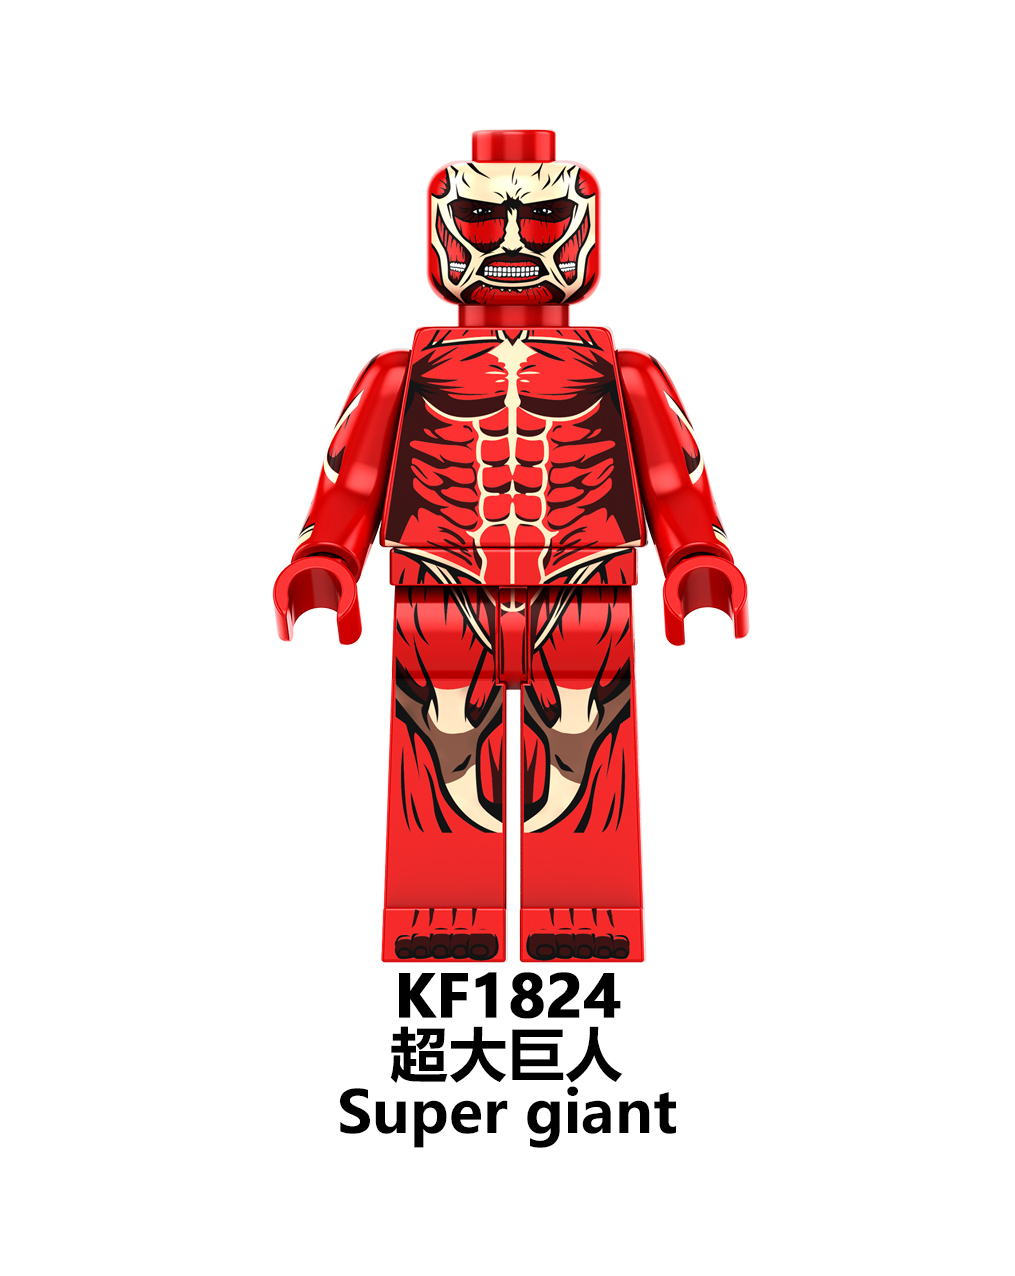 KF6174 KF1820 KF1821 KF1822 KF1823 KF1824 KF1825 KF1826 KF1827 Attack on Titan Building Blocks Action Figures Educational Toys For Kids